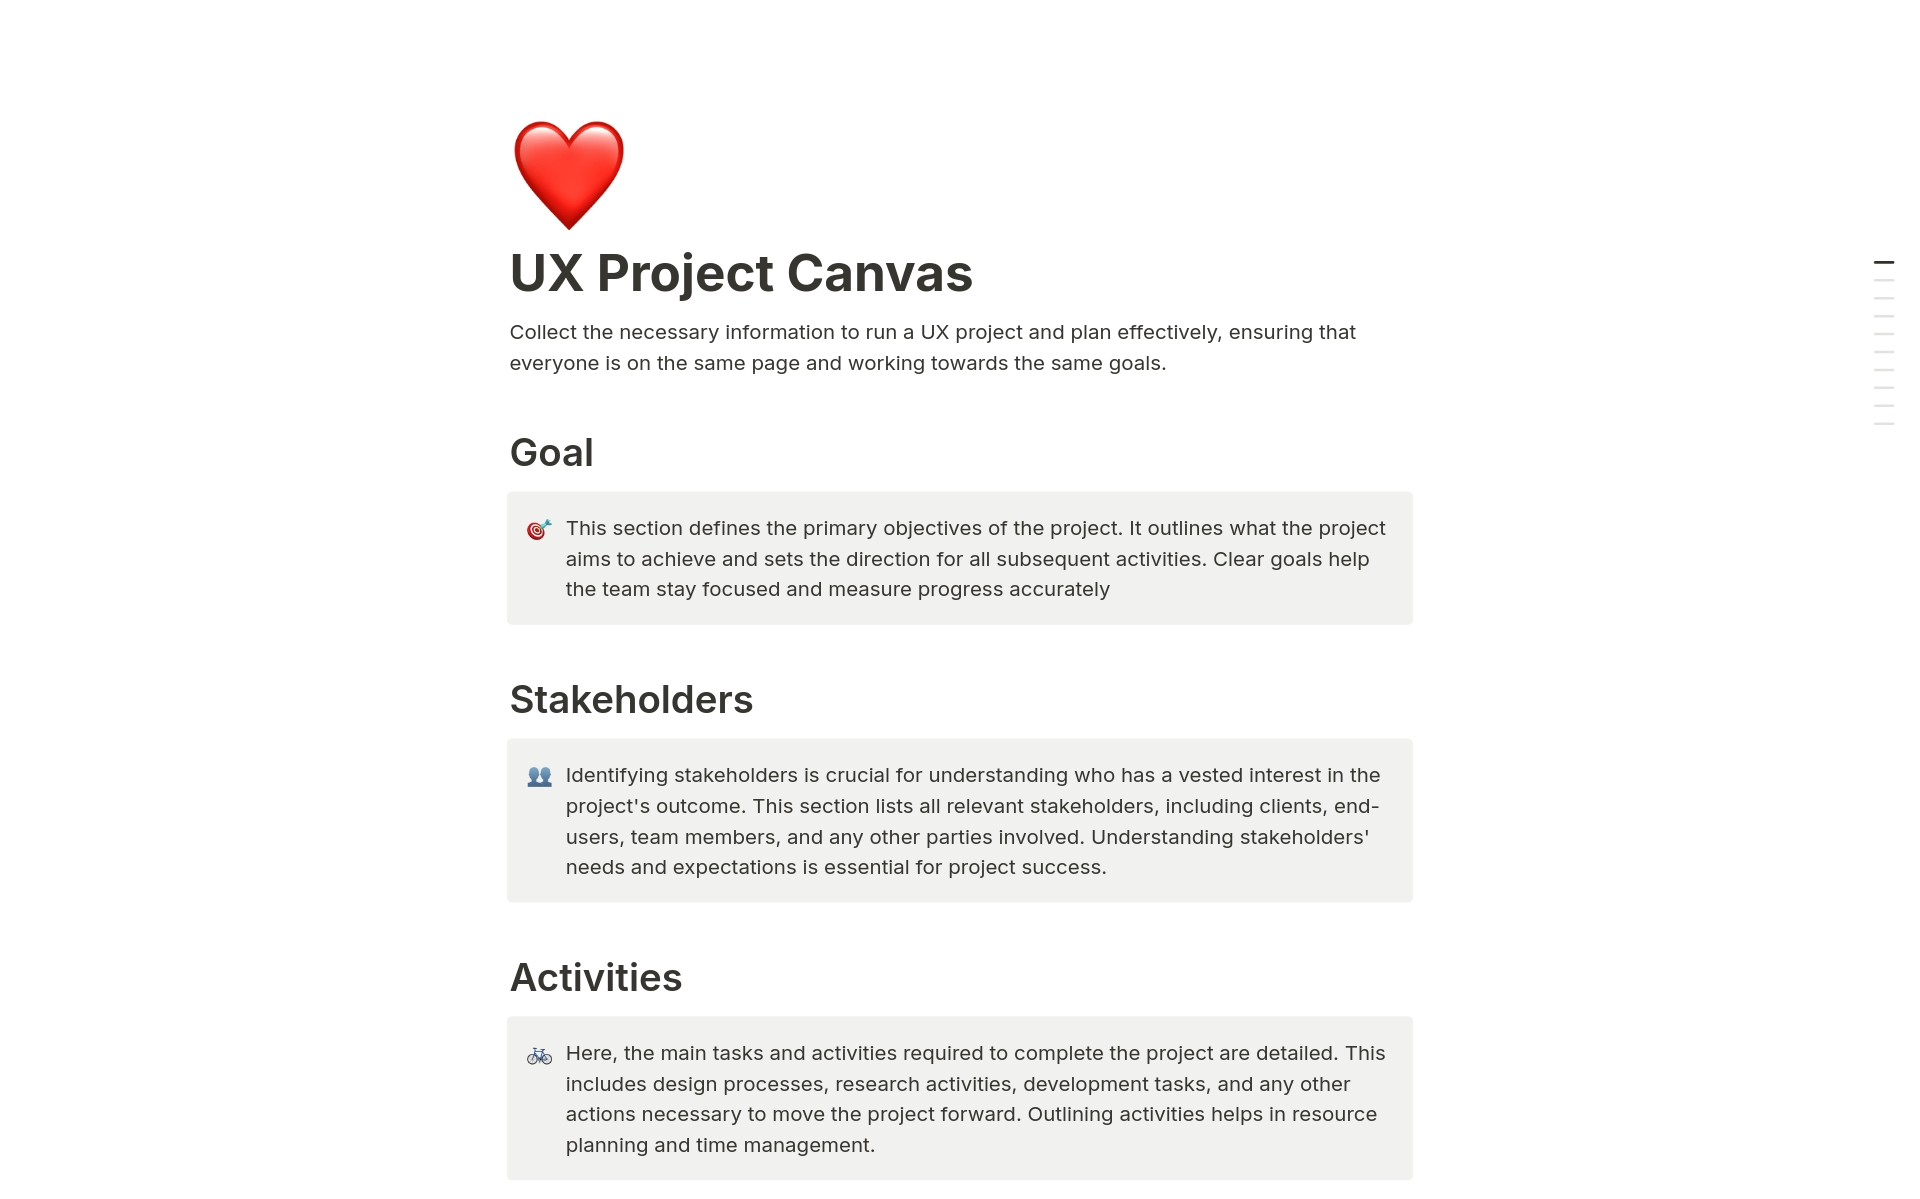 The UX Project Canvas helps collect the necessary information to run a UX project and plan effectively, ensuring that everyone is on the same page and working towards the same goals.